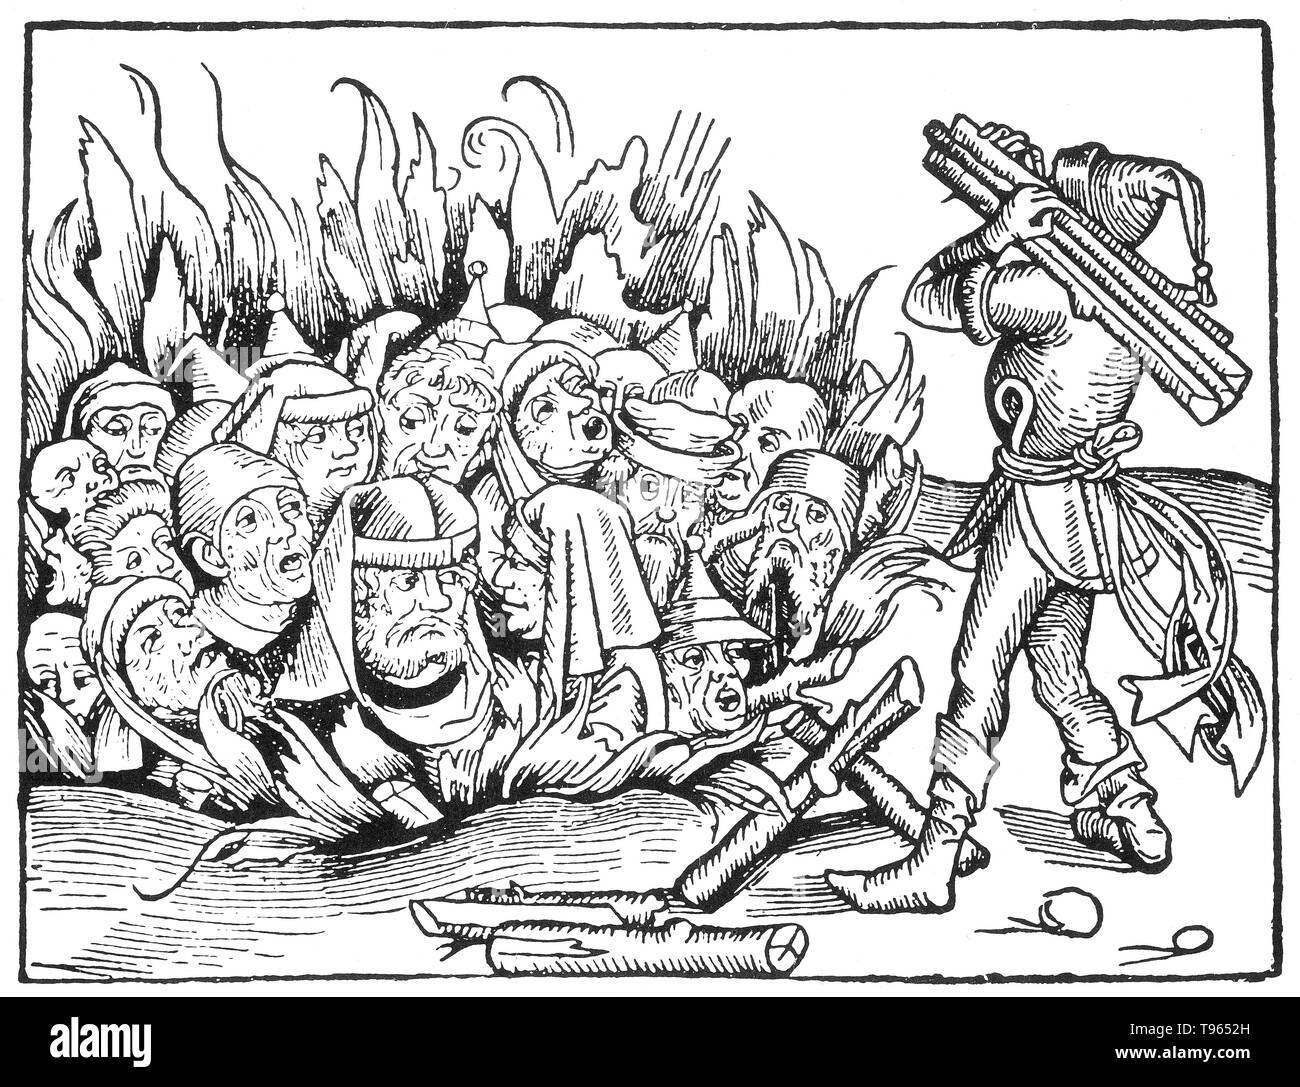 Protestants and Jews accused of heresy and witchcraft being burned alive. The Spanish Inquisition was established in 1480 by Catholic Monarchs Ferdinand II of Aragon and Isabella I. It was intended to maintain Catholic orthodoxy in their kingdoms and to replace the Medieval Inquisition, which was under Papal control. The Inquisition was originally intended primarily to ensure the orthodoxy of those who converted from Judaism and Islam. Stock Photo